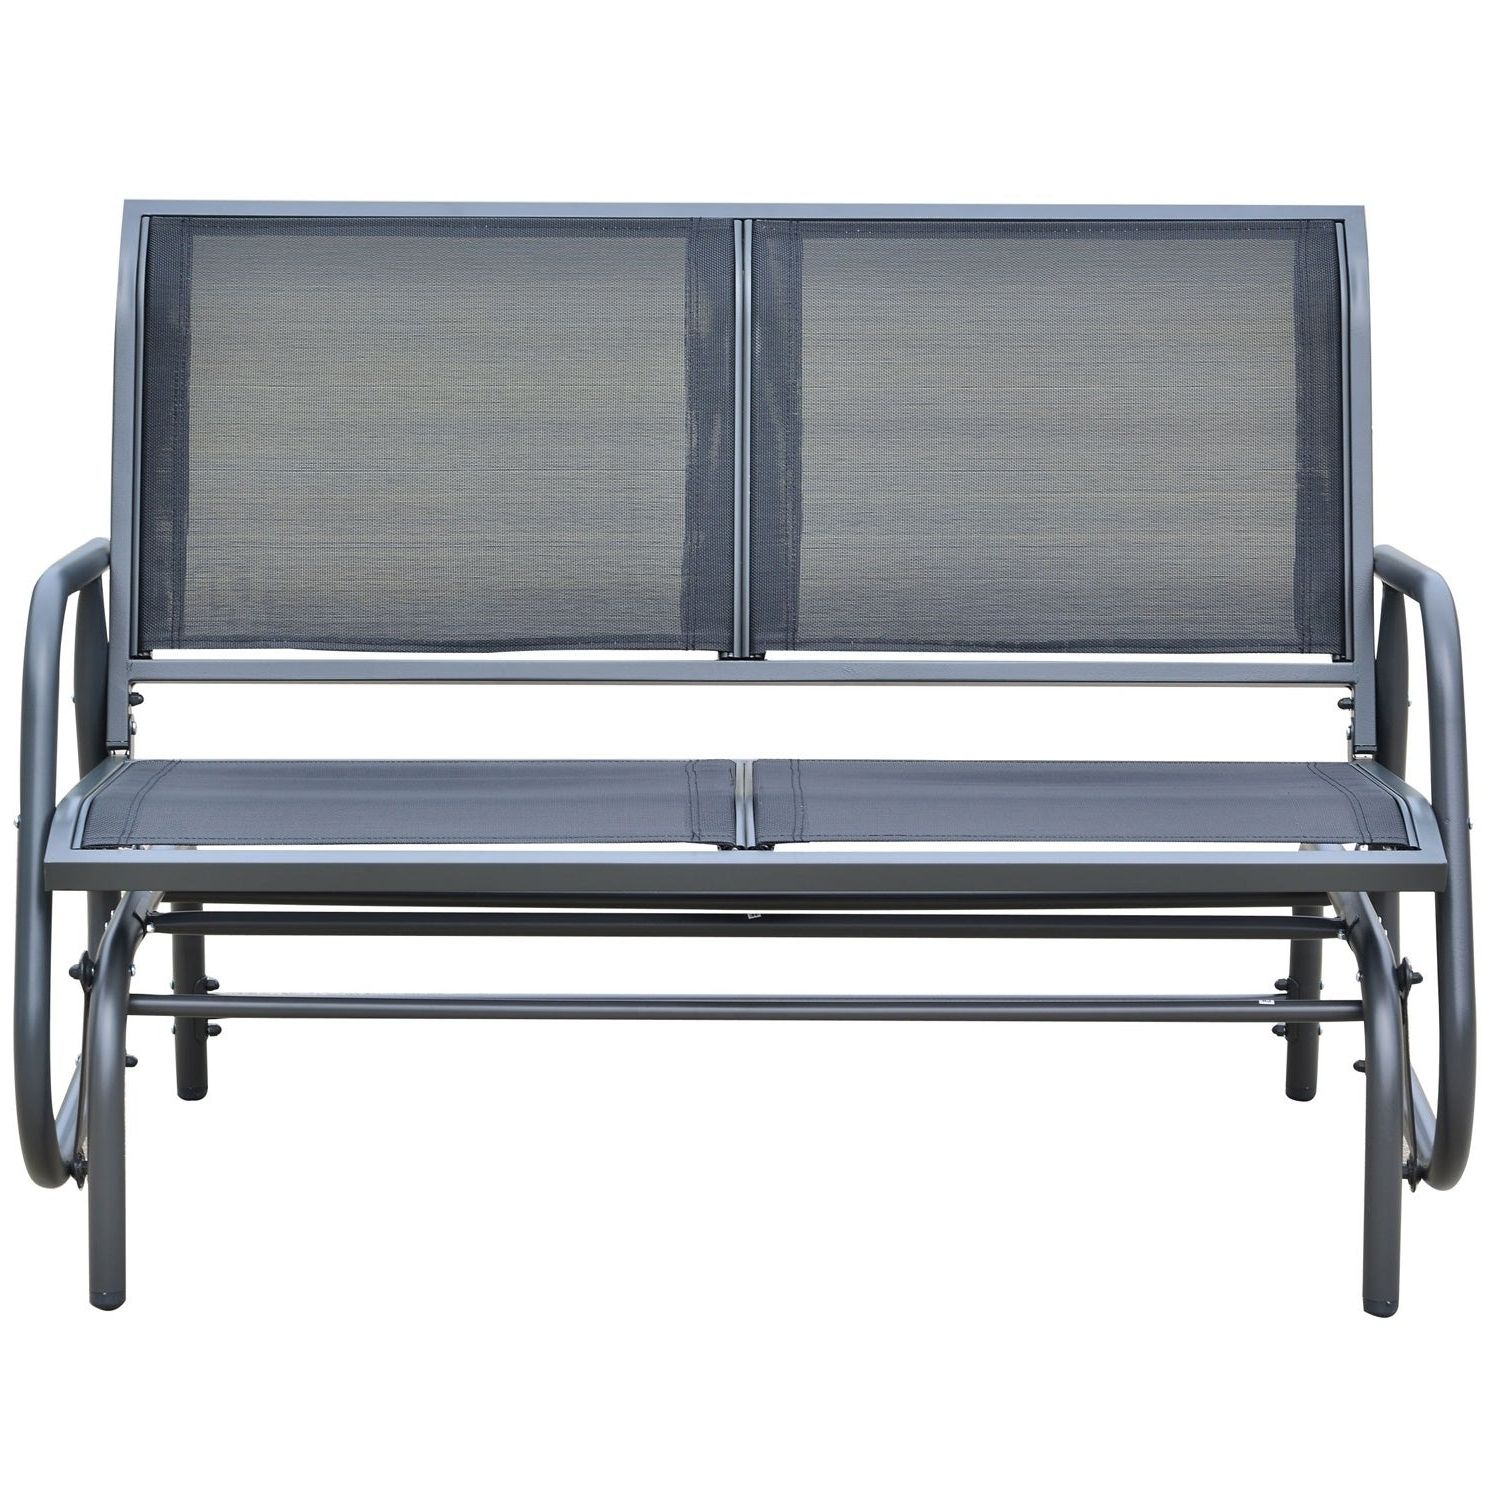 Recent Black Outdoor Durable Steel Frame Patio Swing Glider Bench Chairs With Regard To Outsunny Outdoor Patio Swing Glider Bench Chair (View 21 of 30)